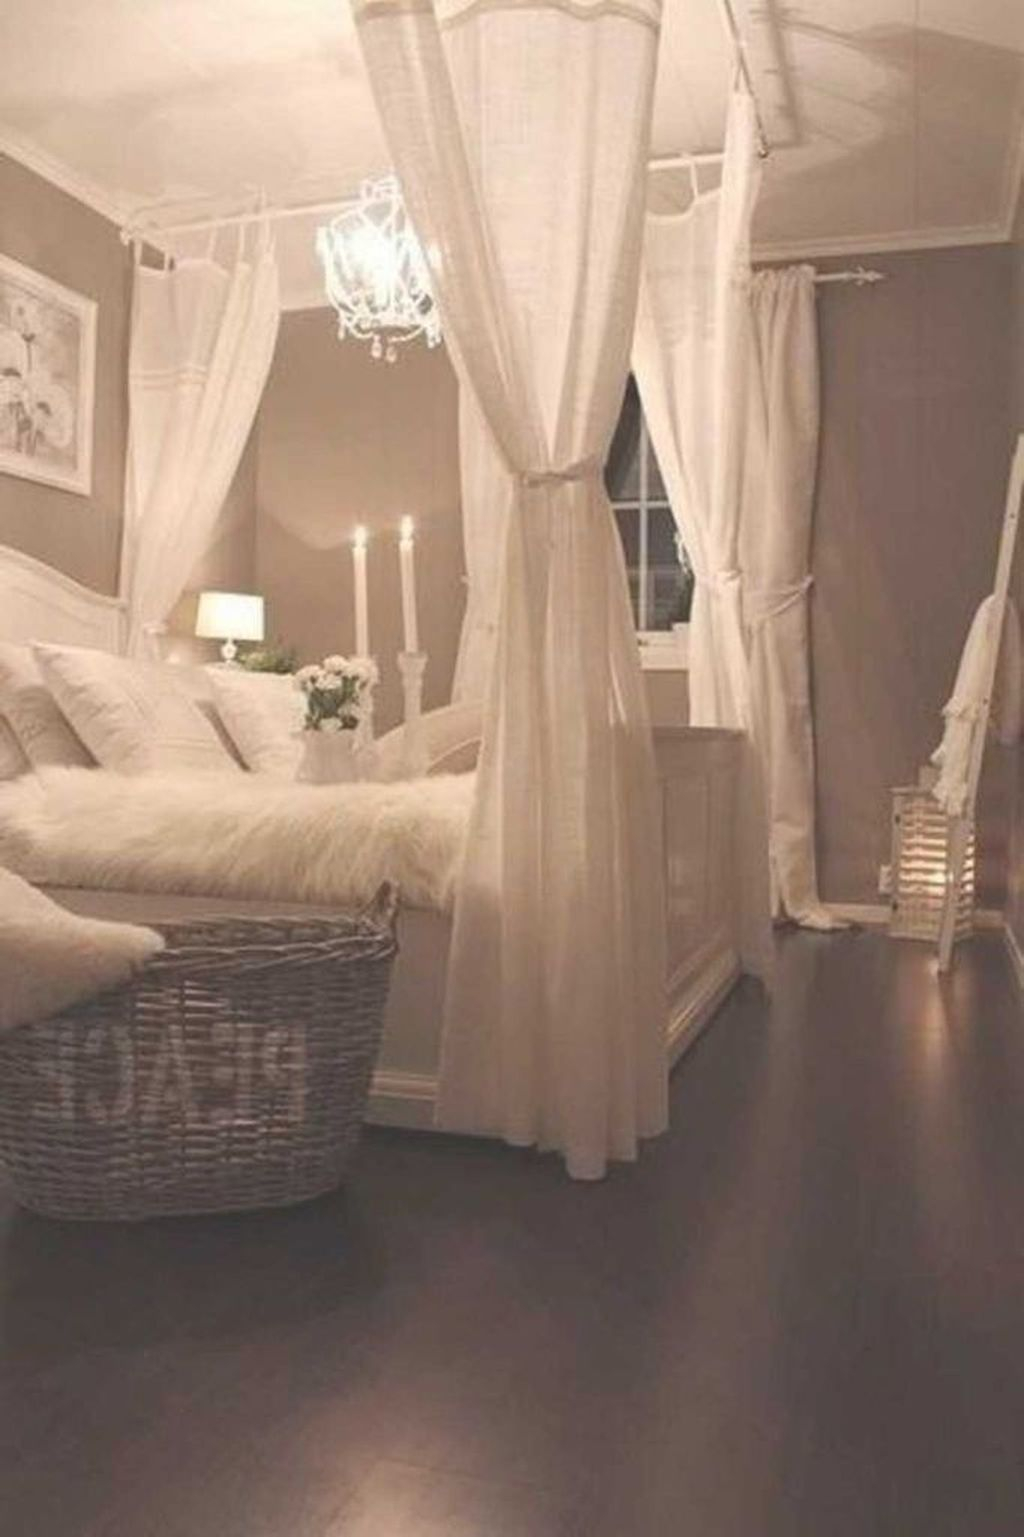 Admiring Bedroom Decor Ideas To Have Right Now 30